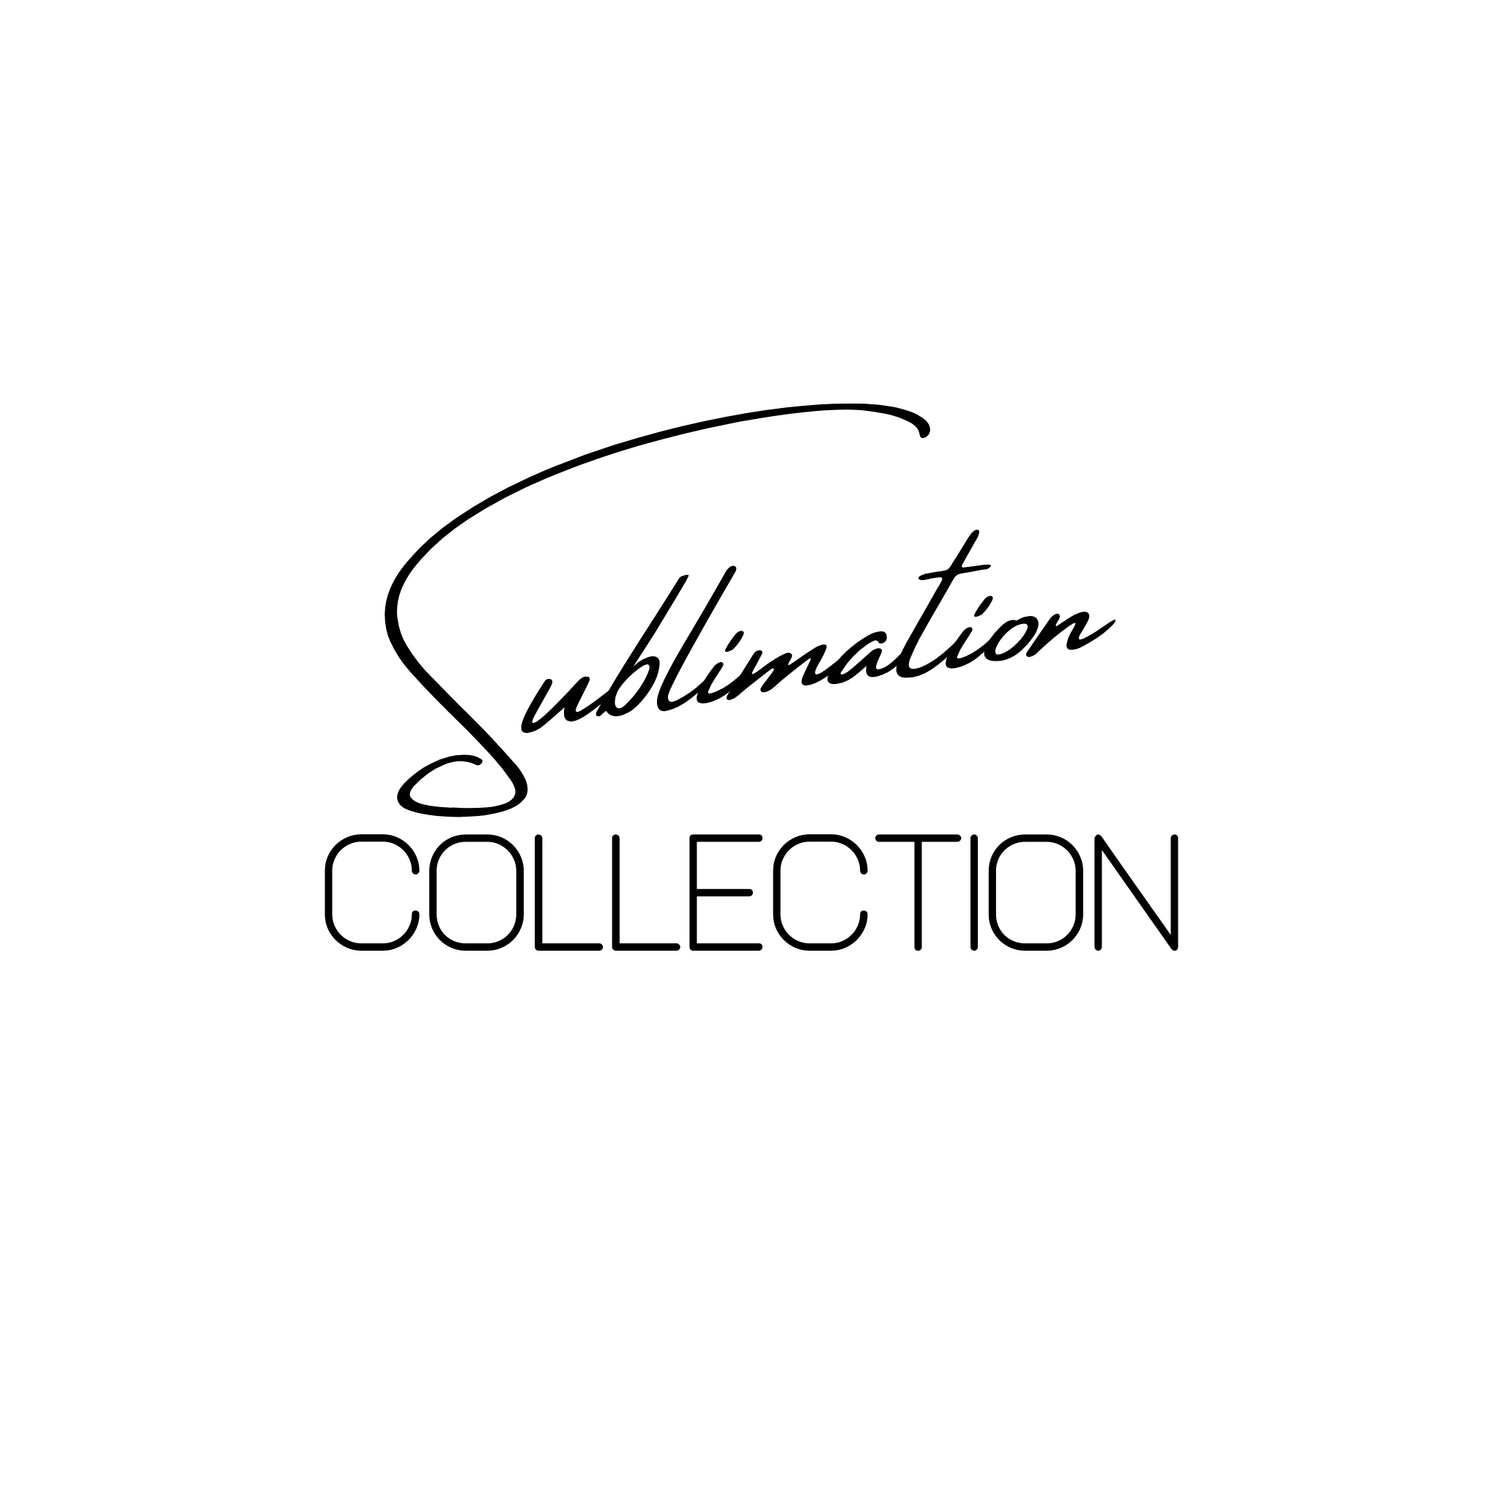 Sublimation Collection